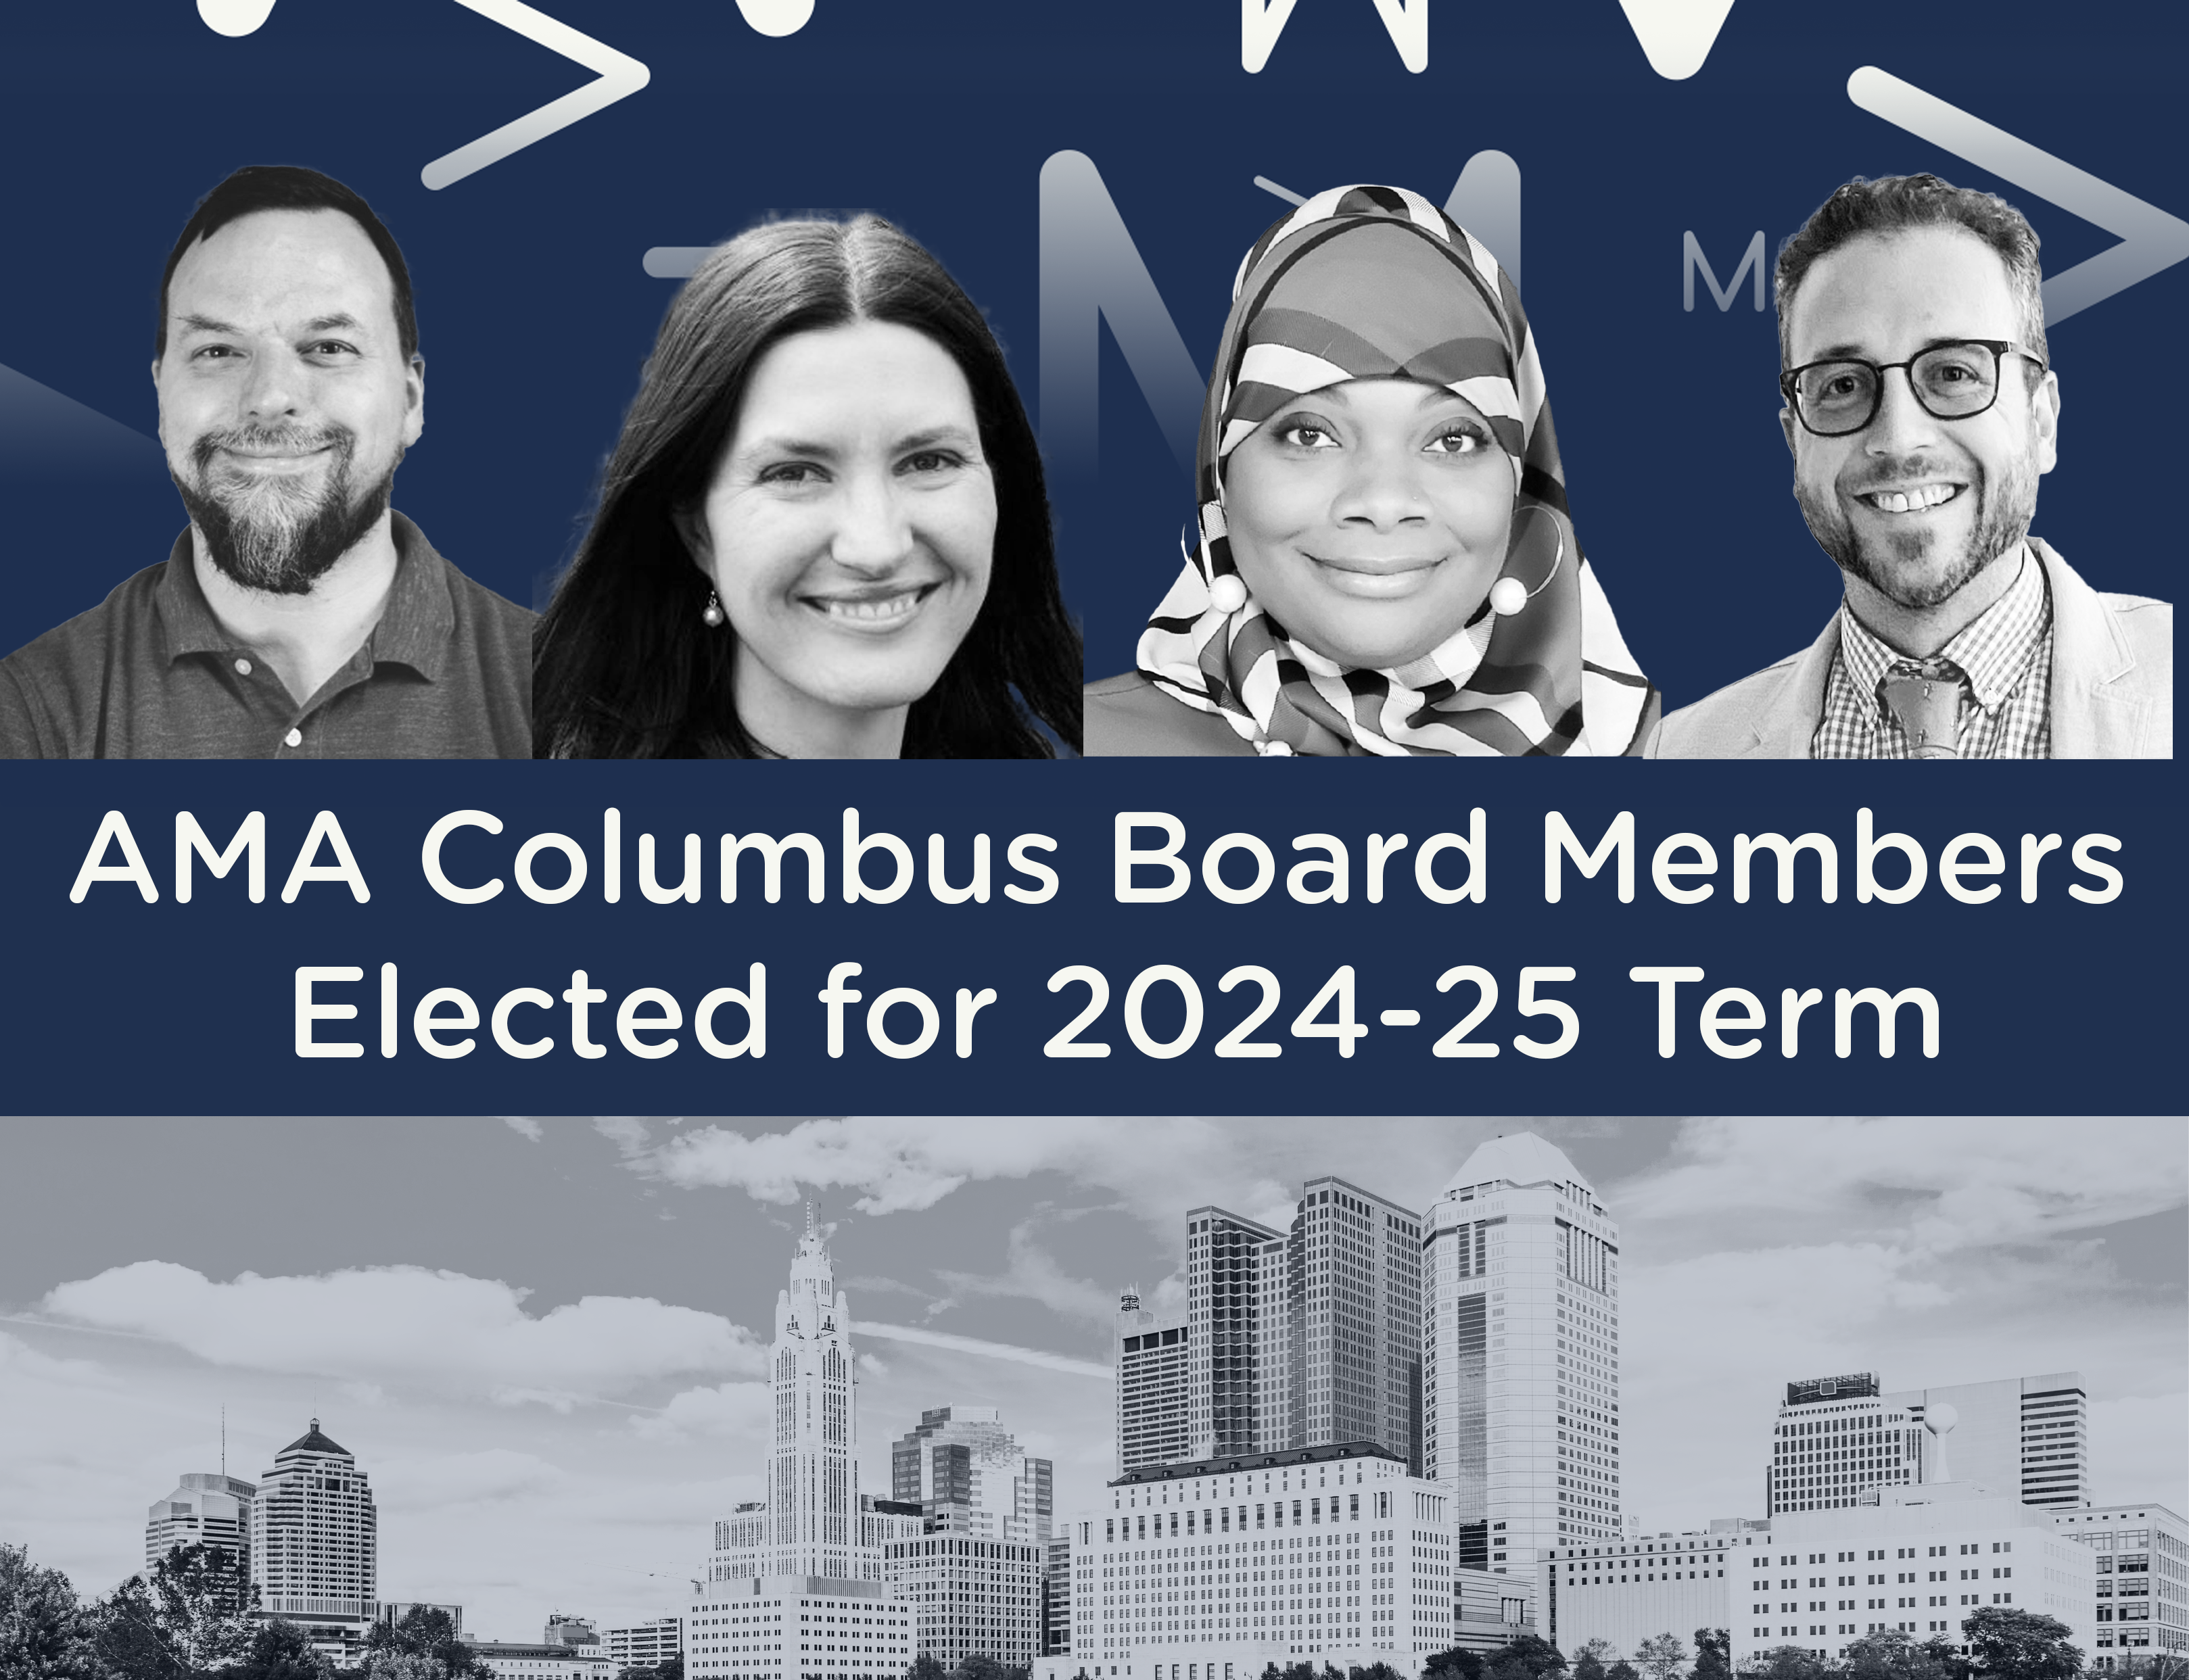 The 2024-25 AMA Columbus Board was elected in March.